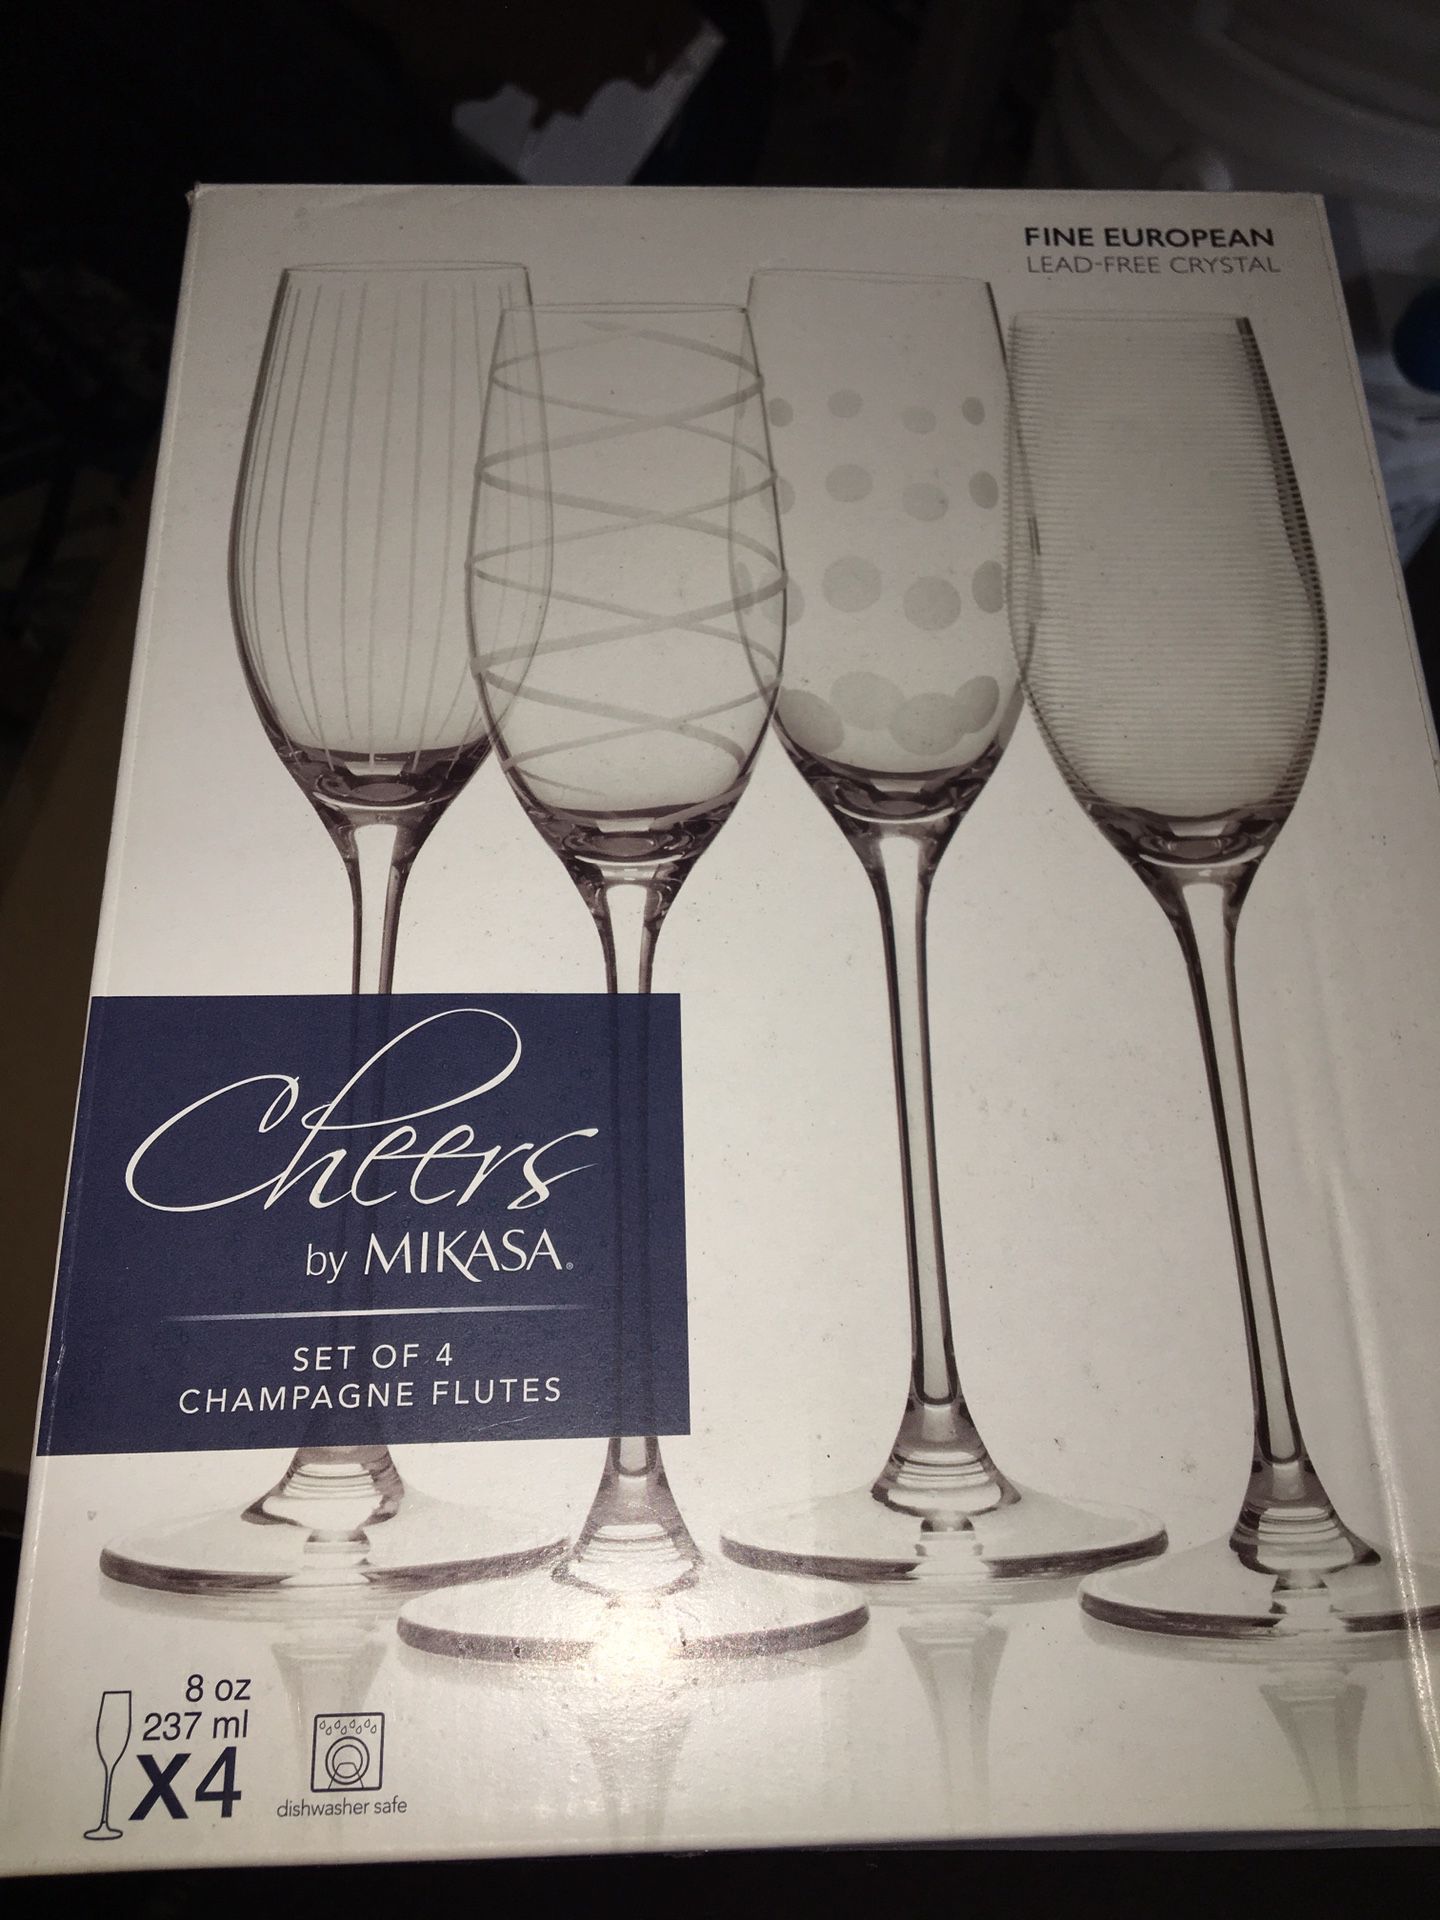 NEW IN BOX Four Champagne Flutes. Cheers by Mikasa